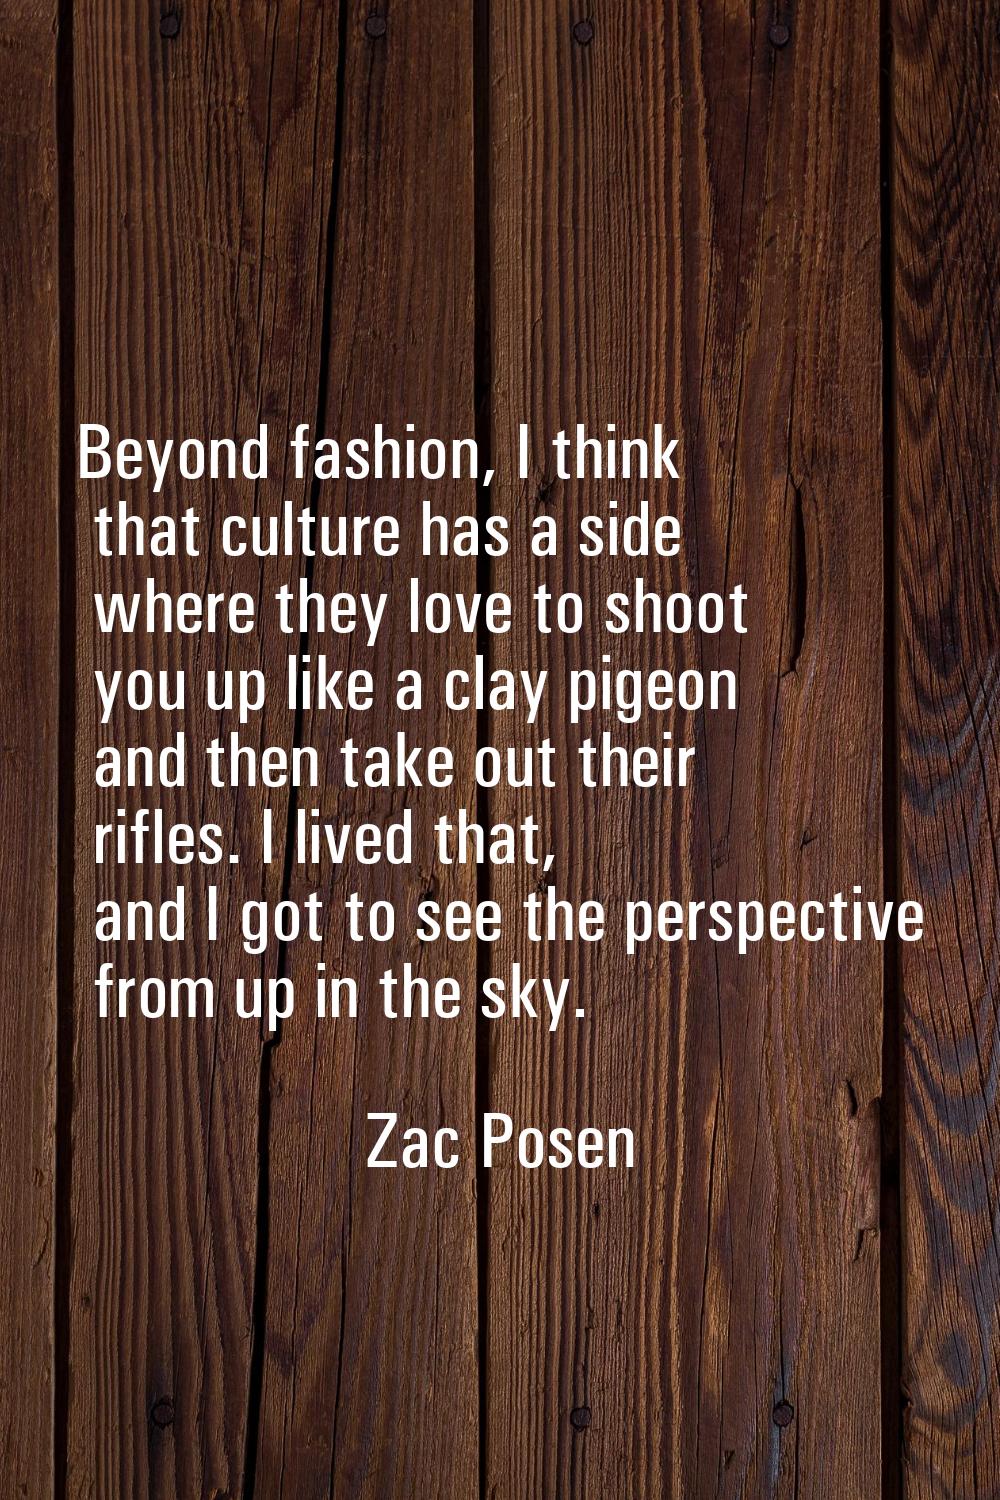 Beyond fashion, I think that culture has a side where they love to shoot you up like a clay pigeon 